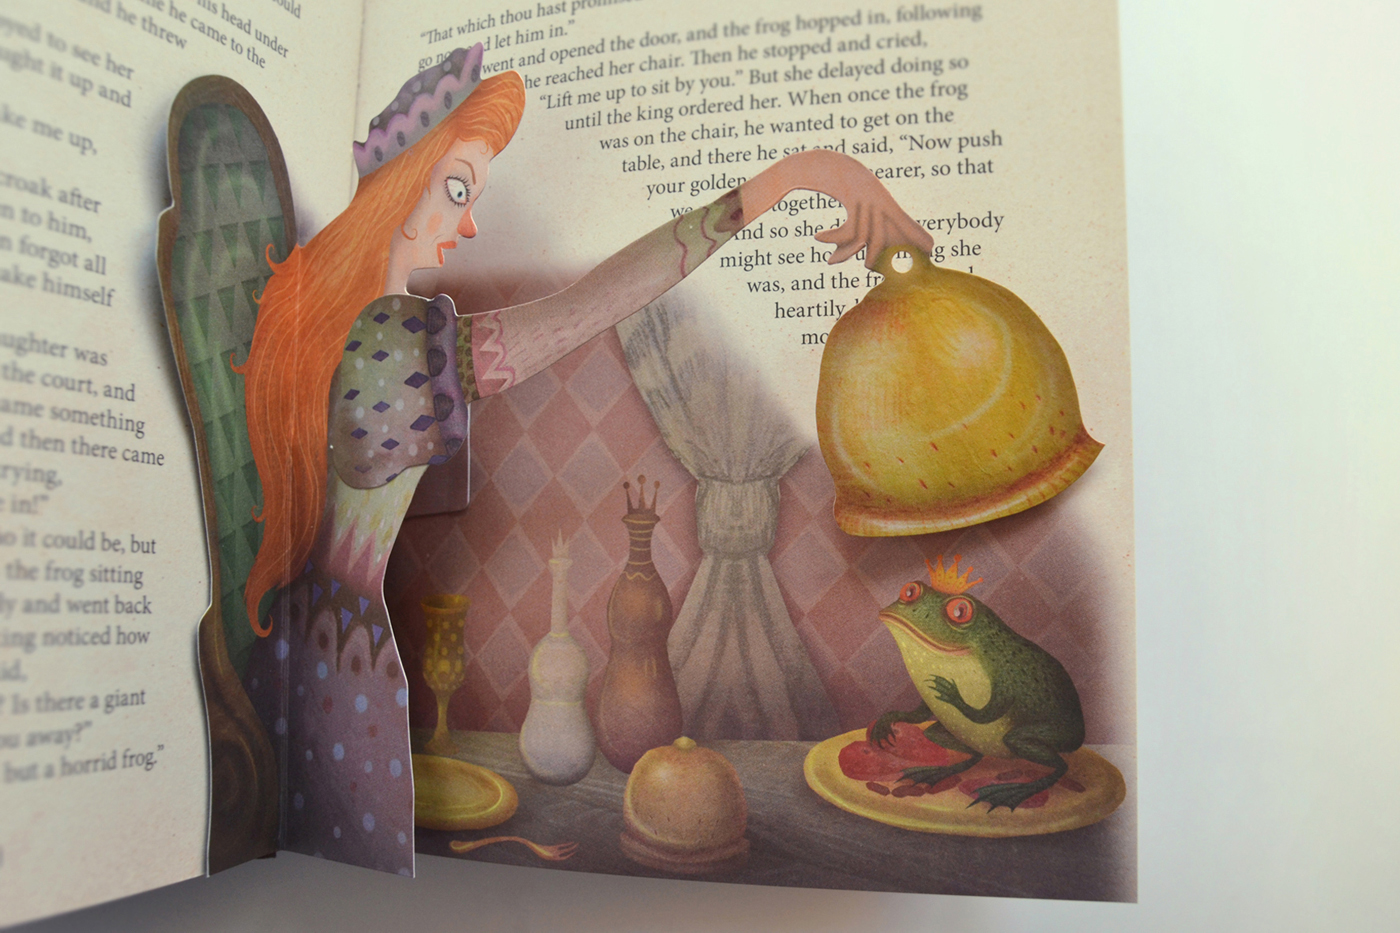 fairy tale brothers grimm illustrated fairy tales Red riding hood cinderella snow white hansel and gretel frog prince the six swans Picture book